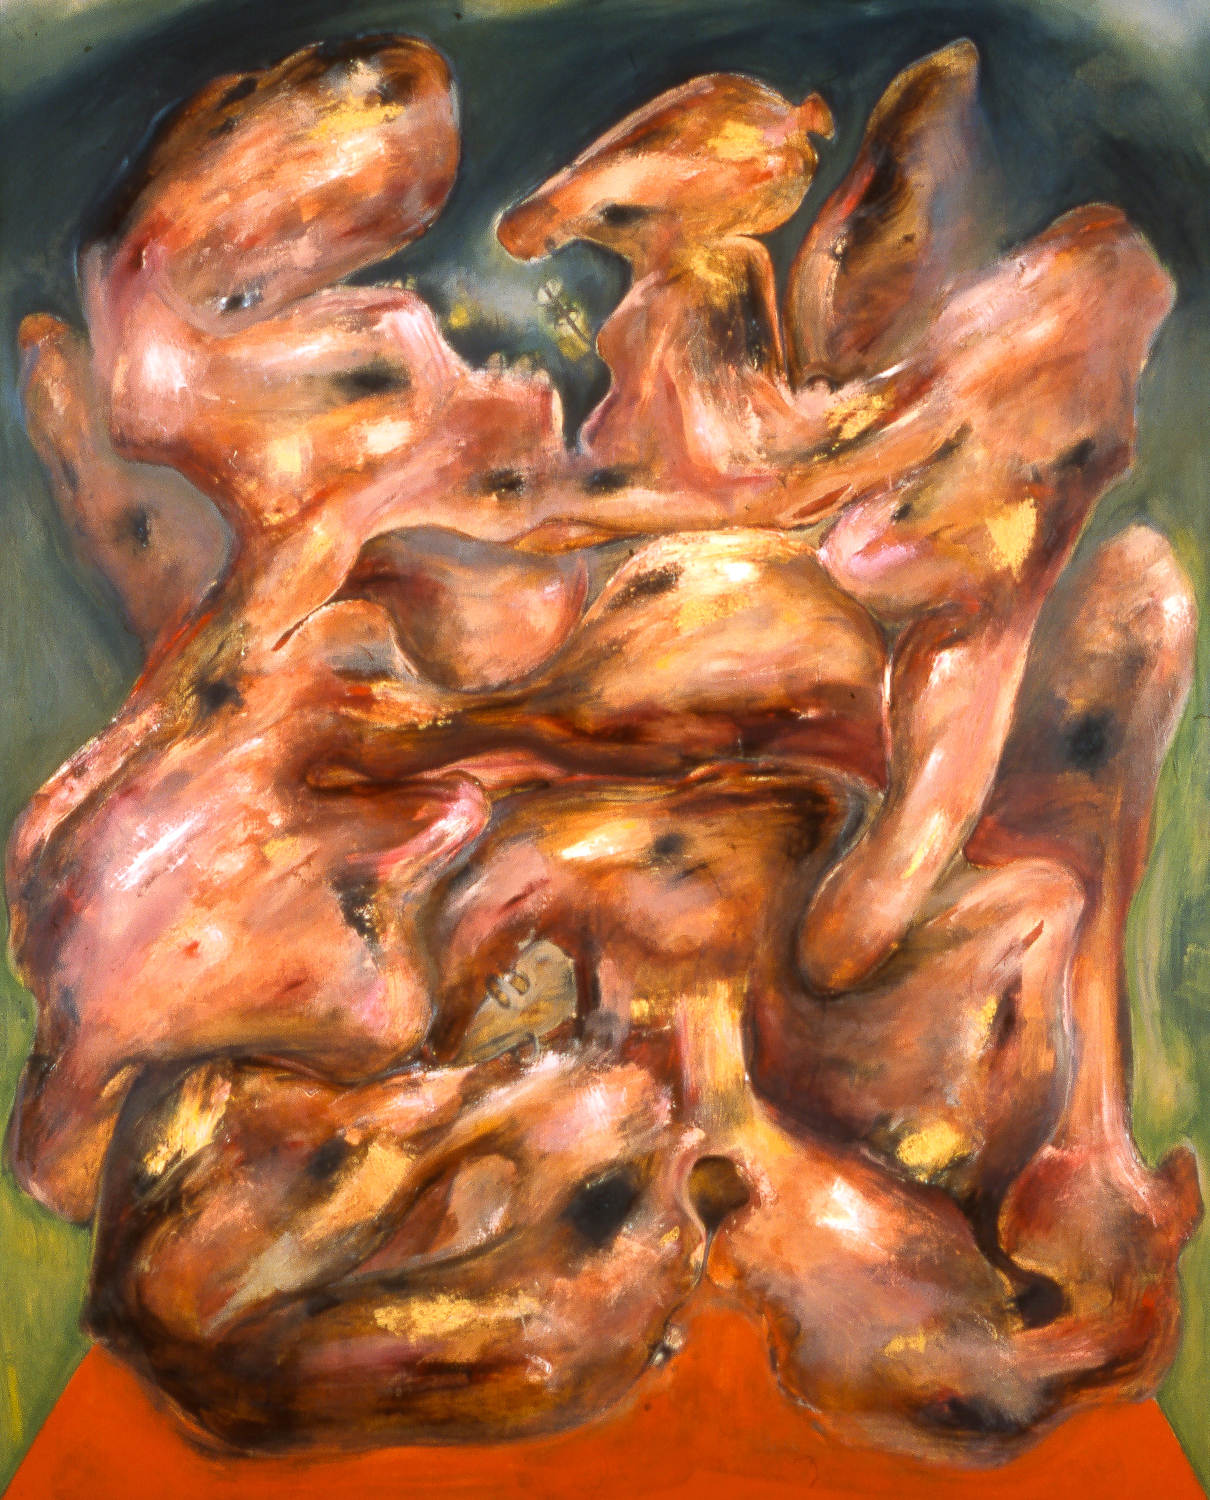    Alter , 2003   Oil on canvas   92 x 74"  